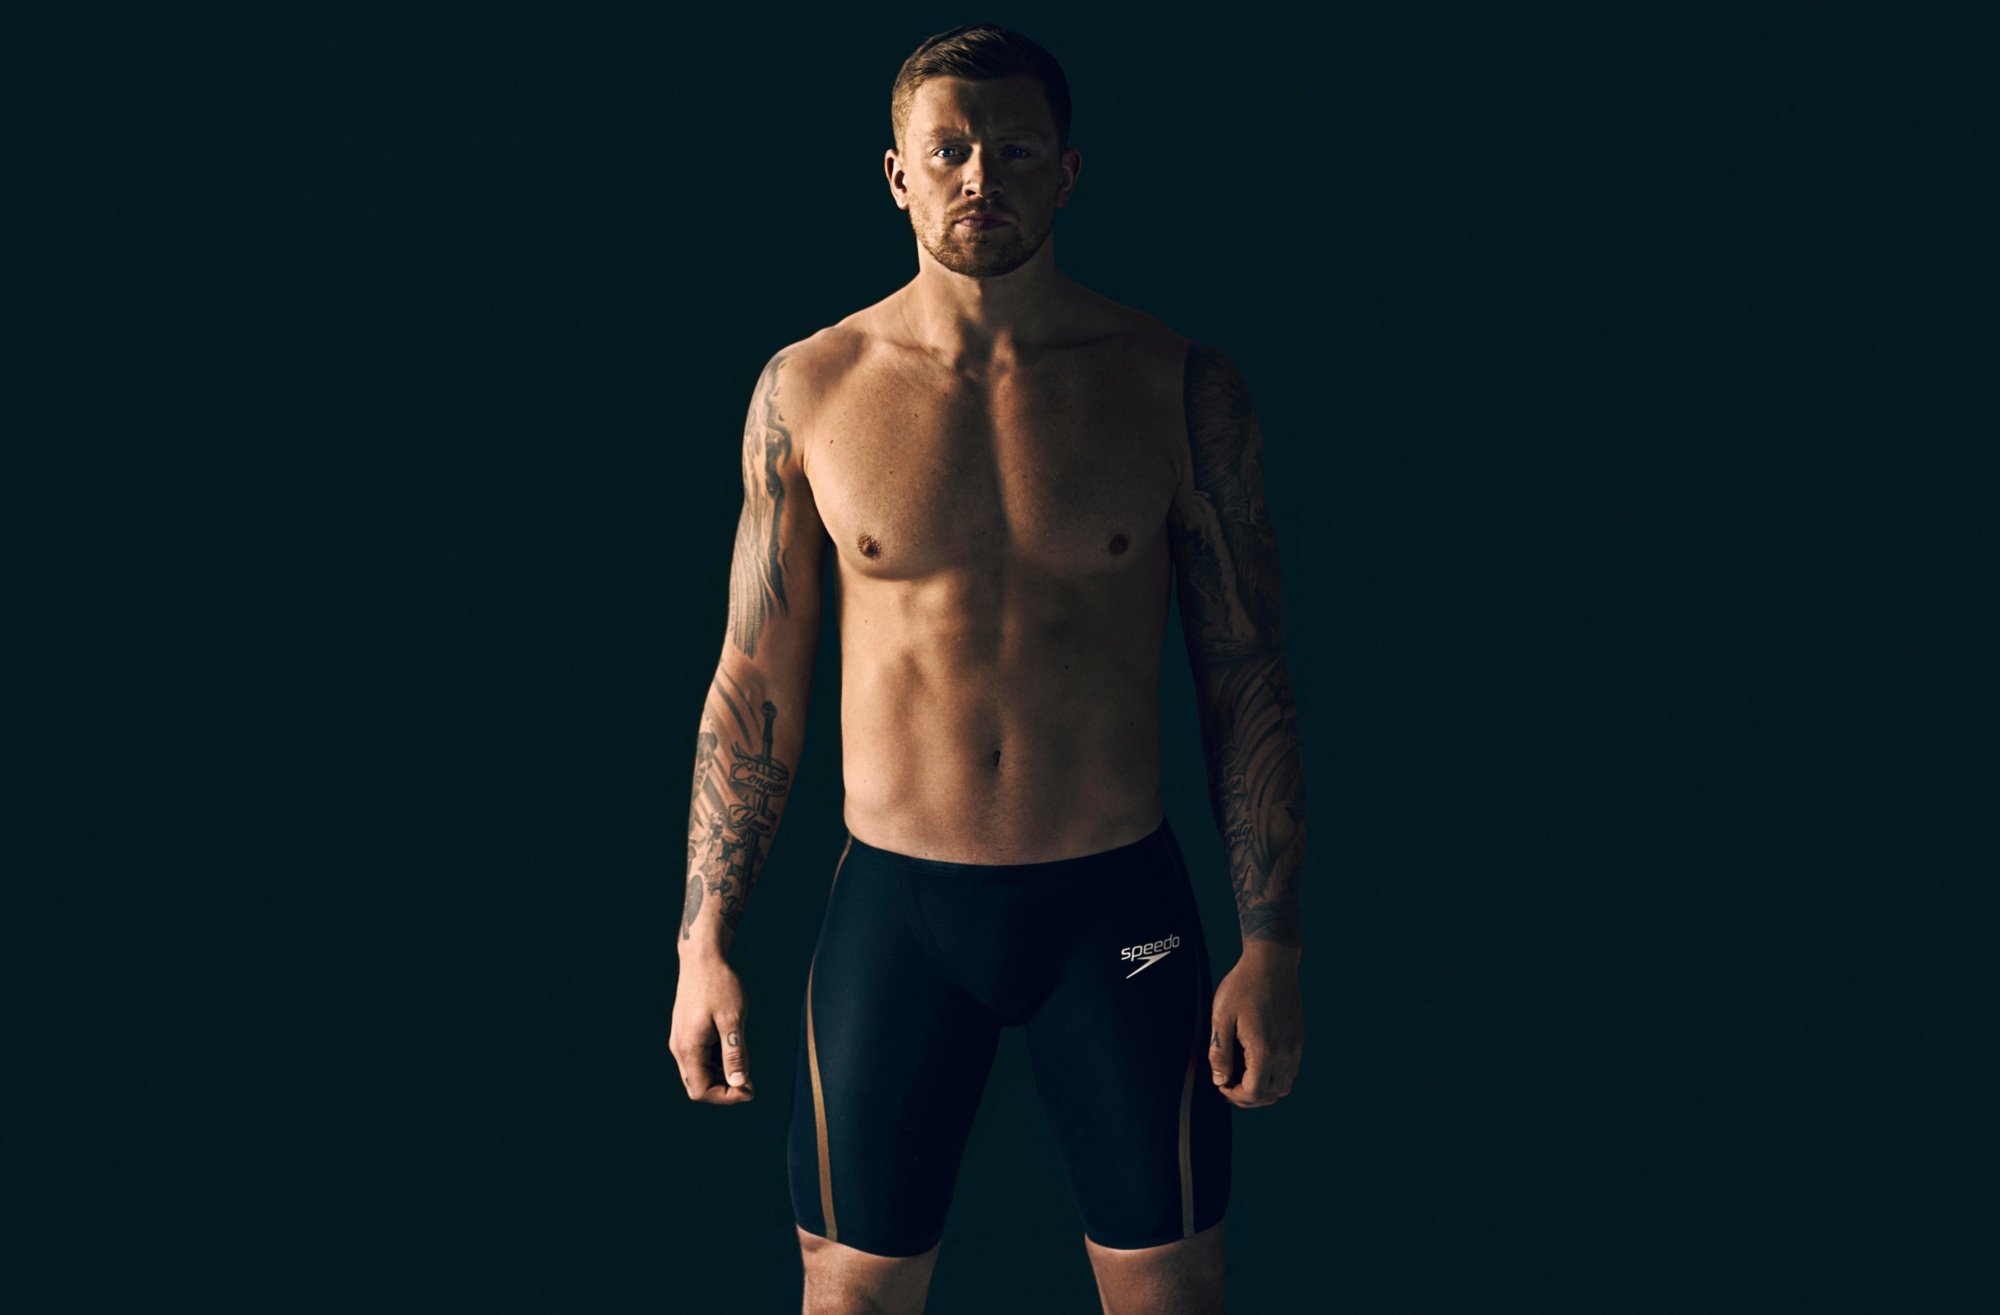 Adam Peaty stands proudly infront of black background